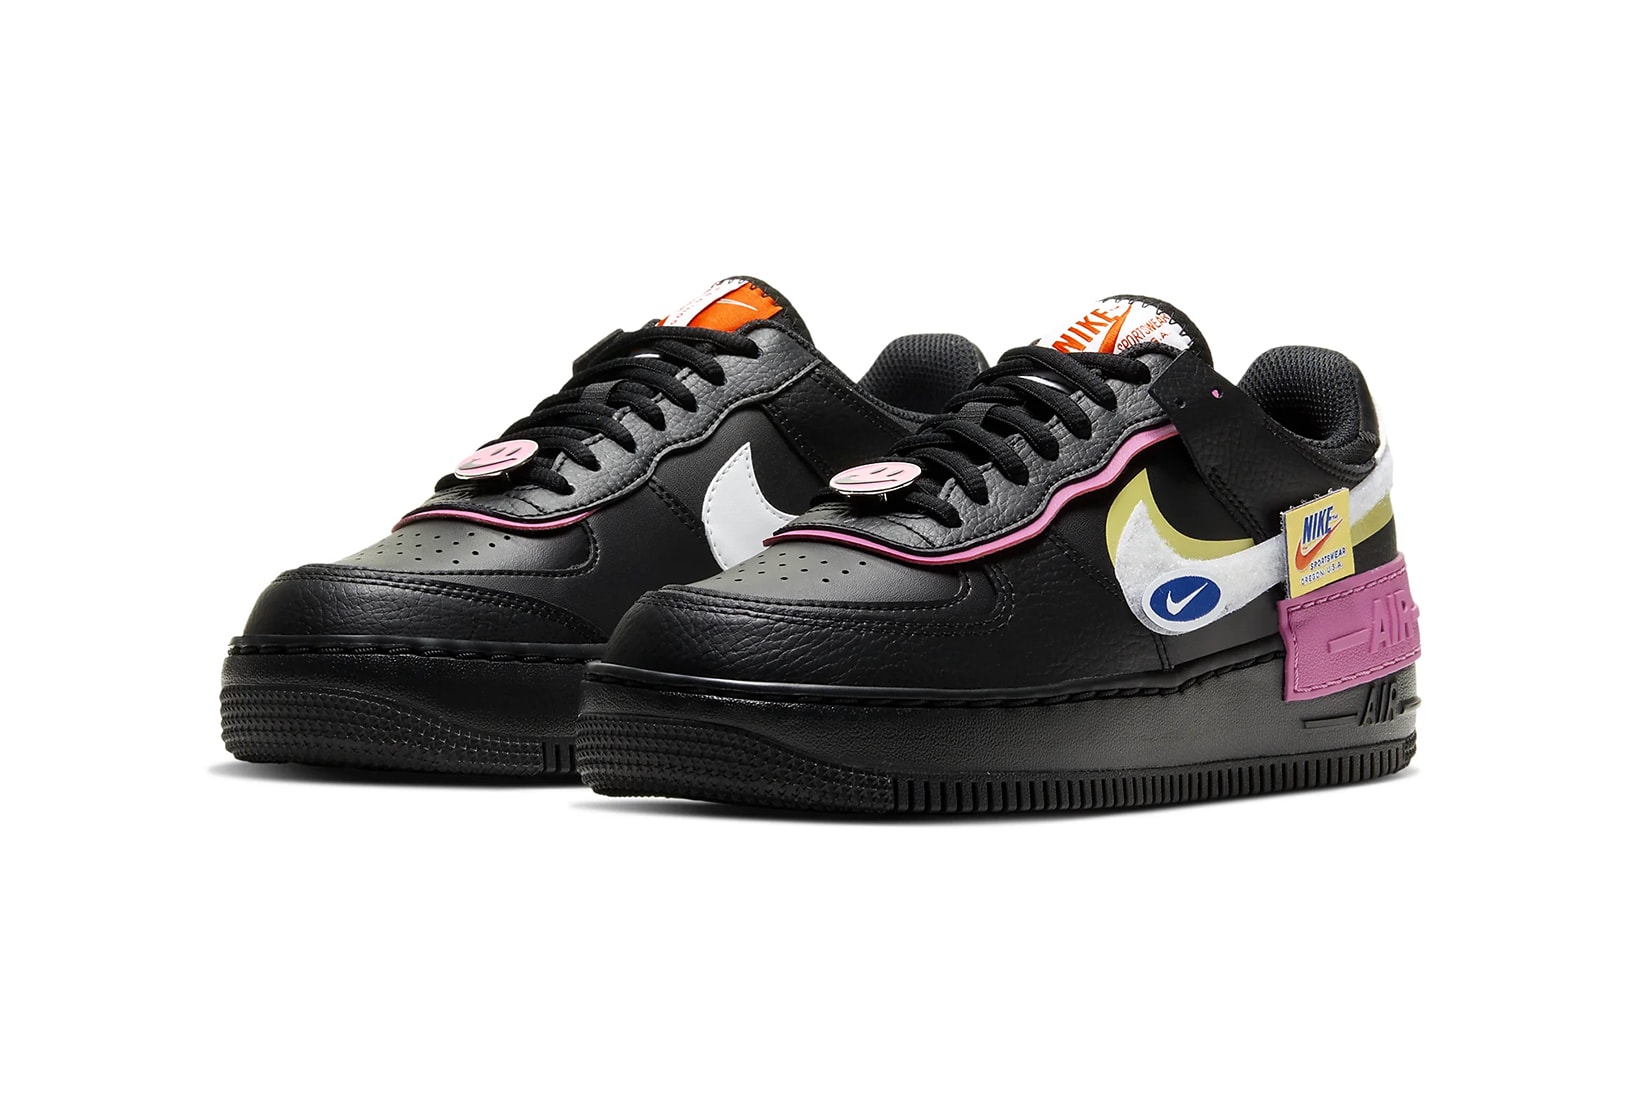 nike air force 1 shadow womens sneakers black pink fuchsia white yellow removable patches shoes footwear sneakerhead